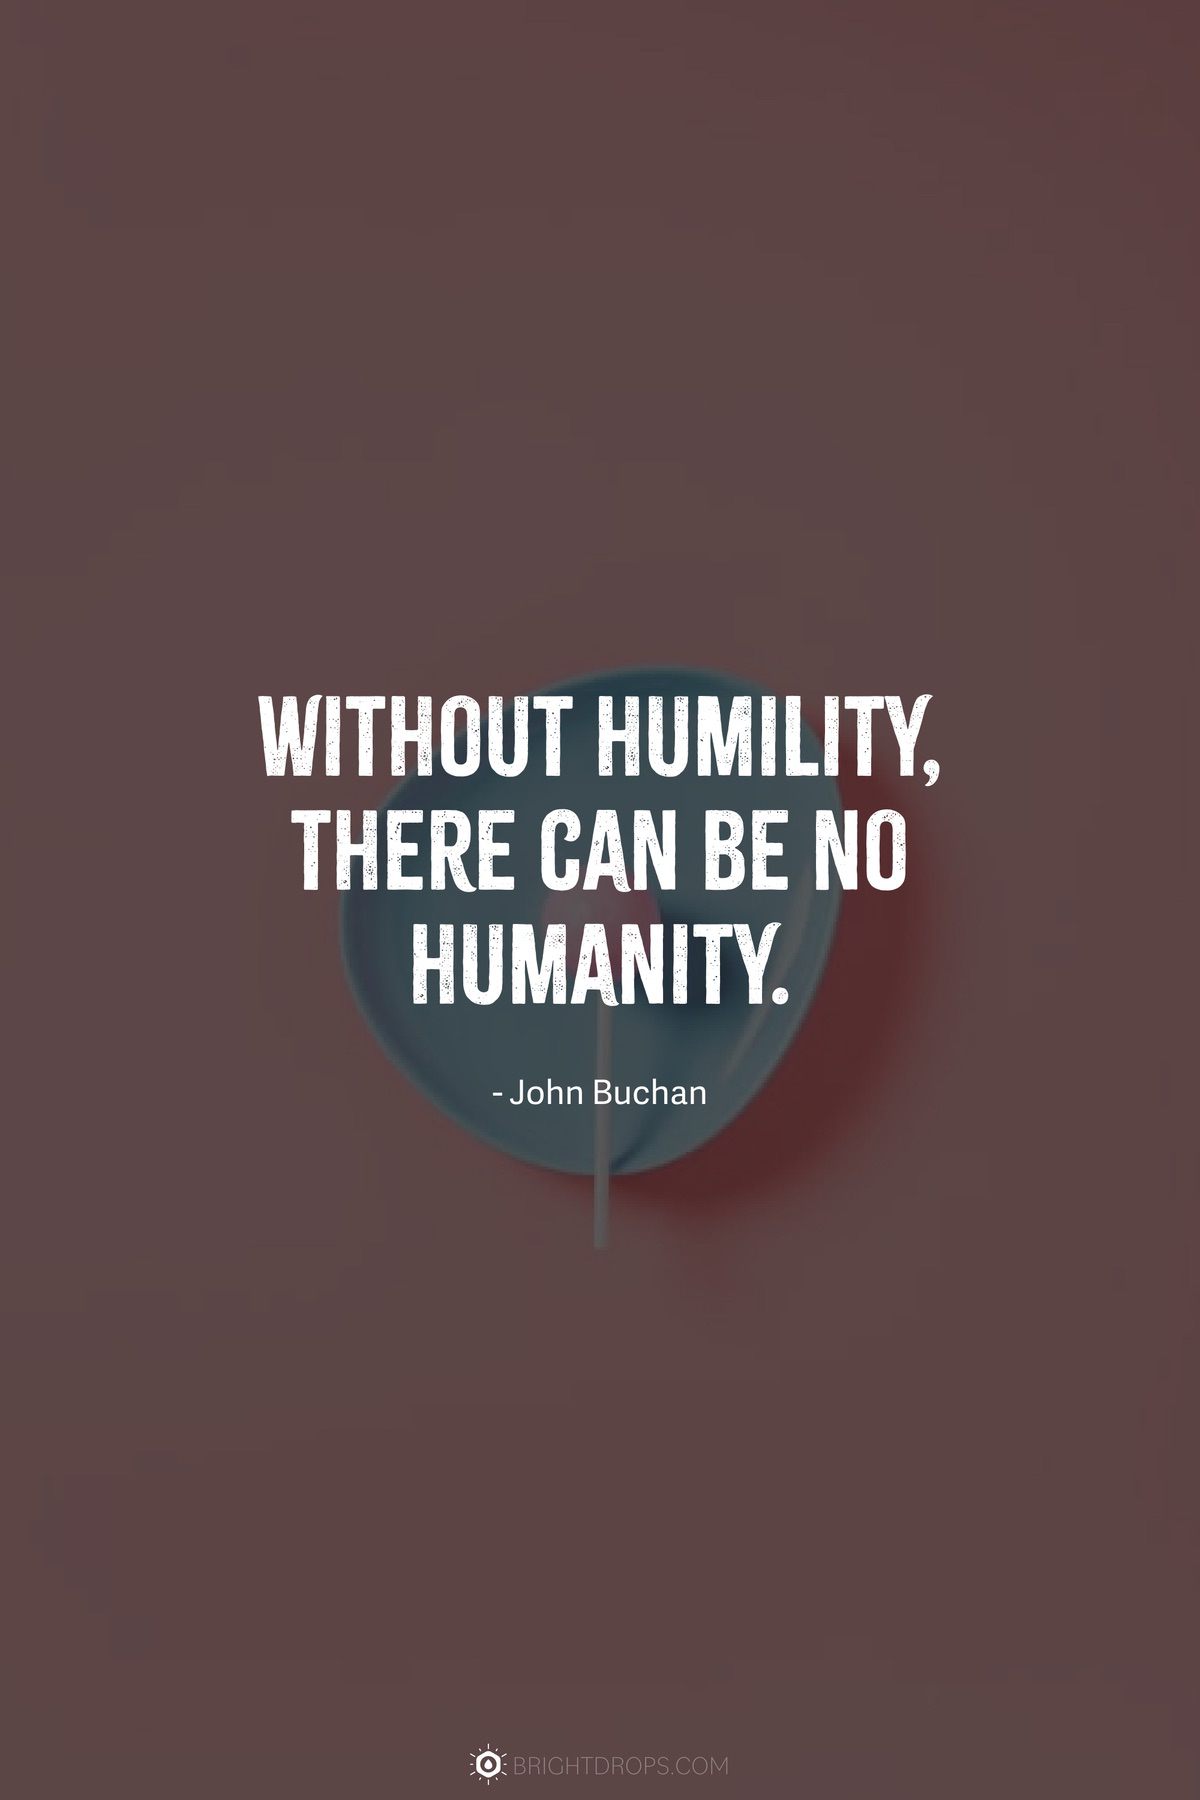 Without humility, there can be no humanity.